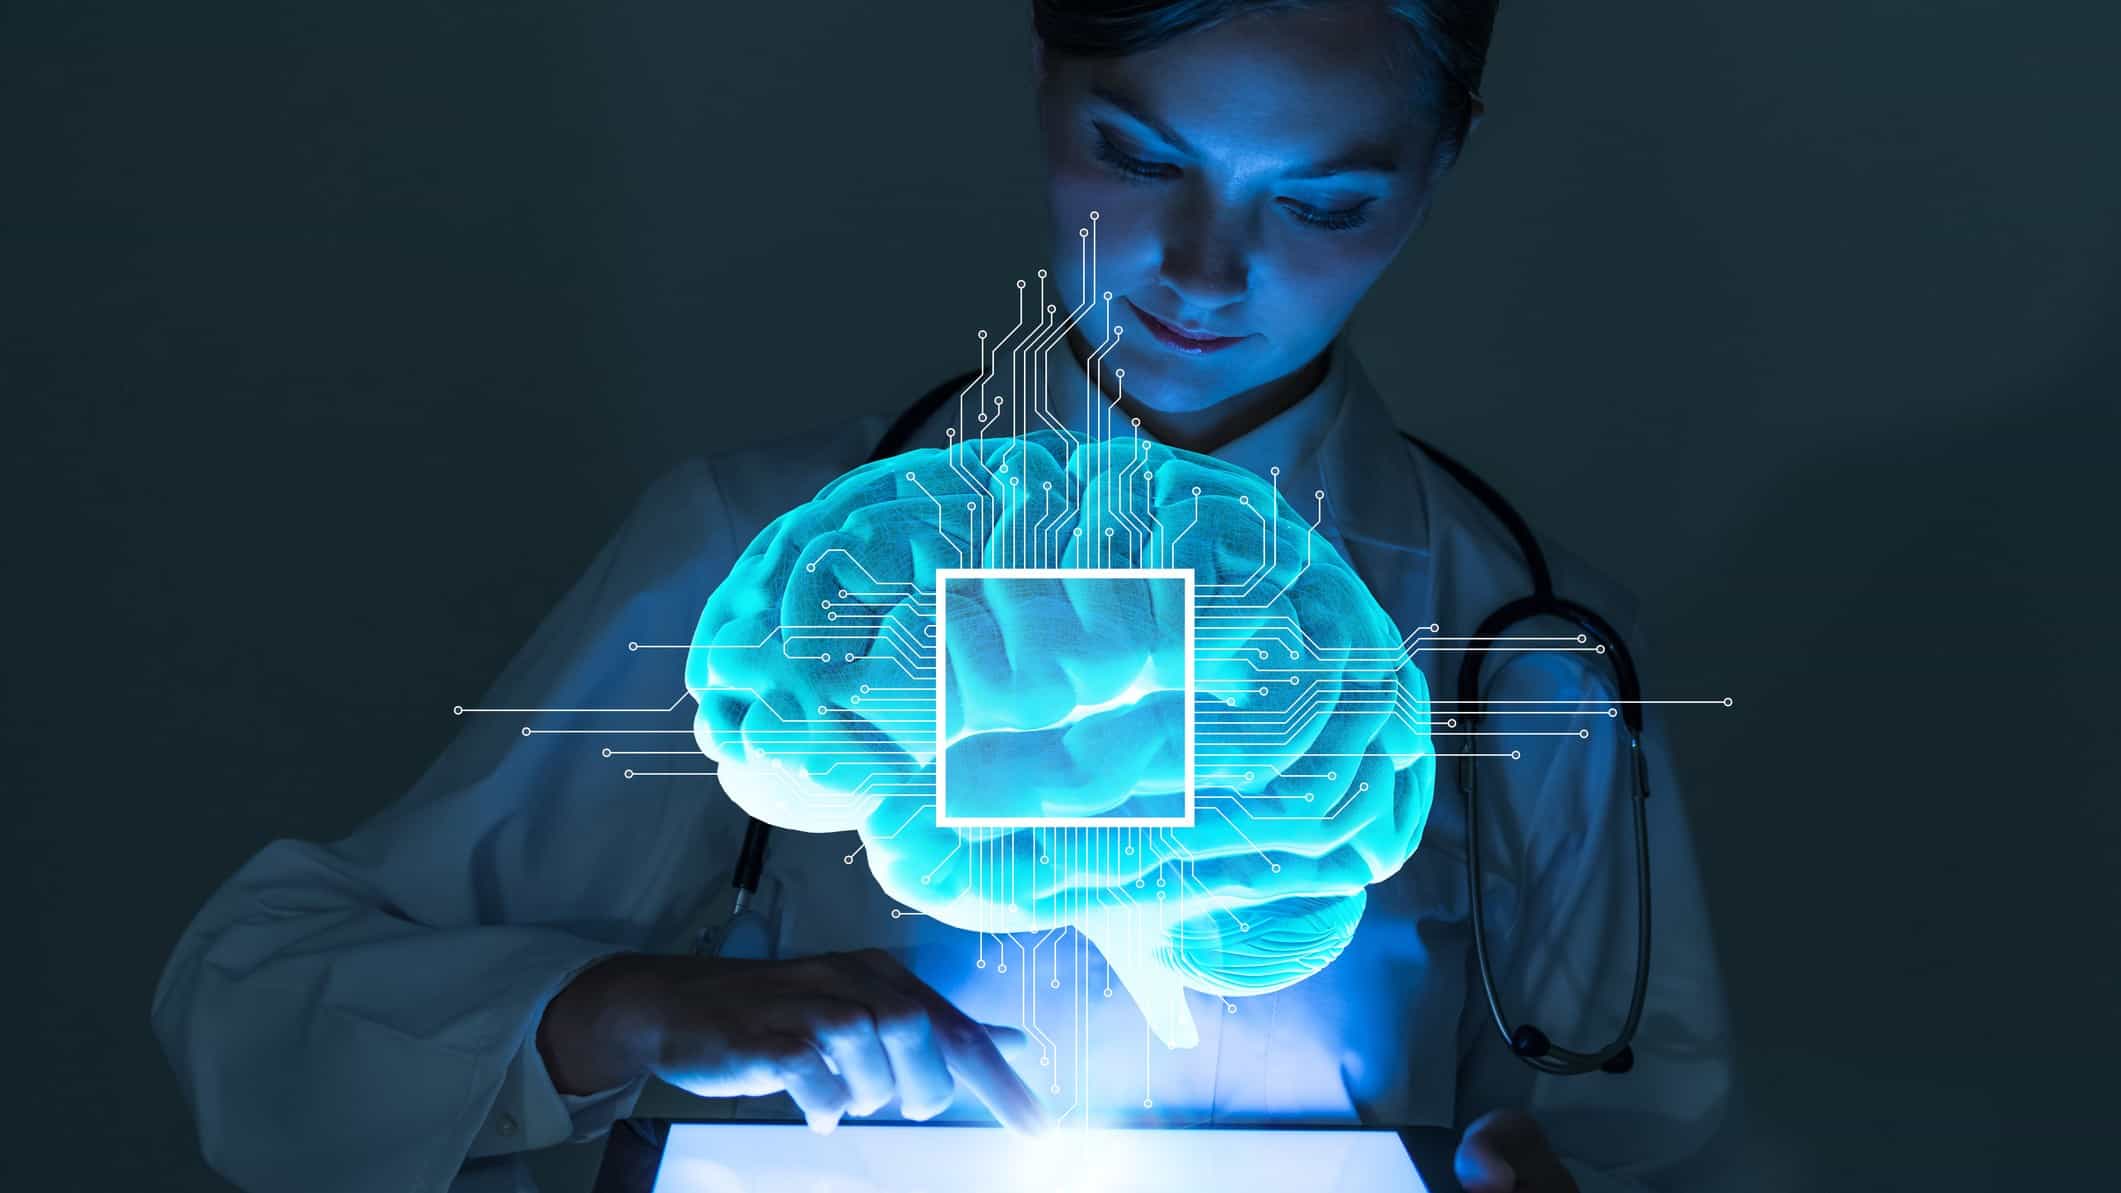 a scientist researcher operates a computer with a graphic image of a brain in the foreground signifying artificial intelligence or AI.